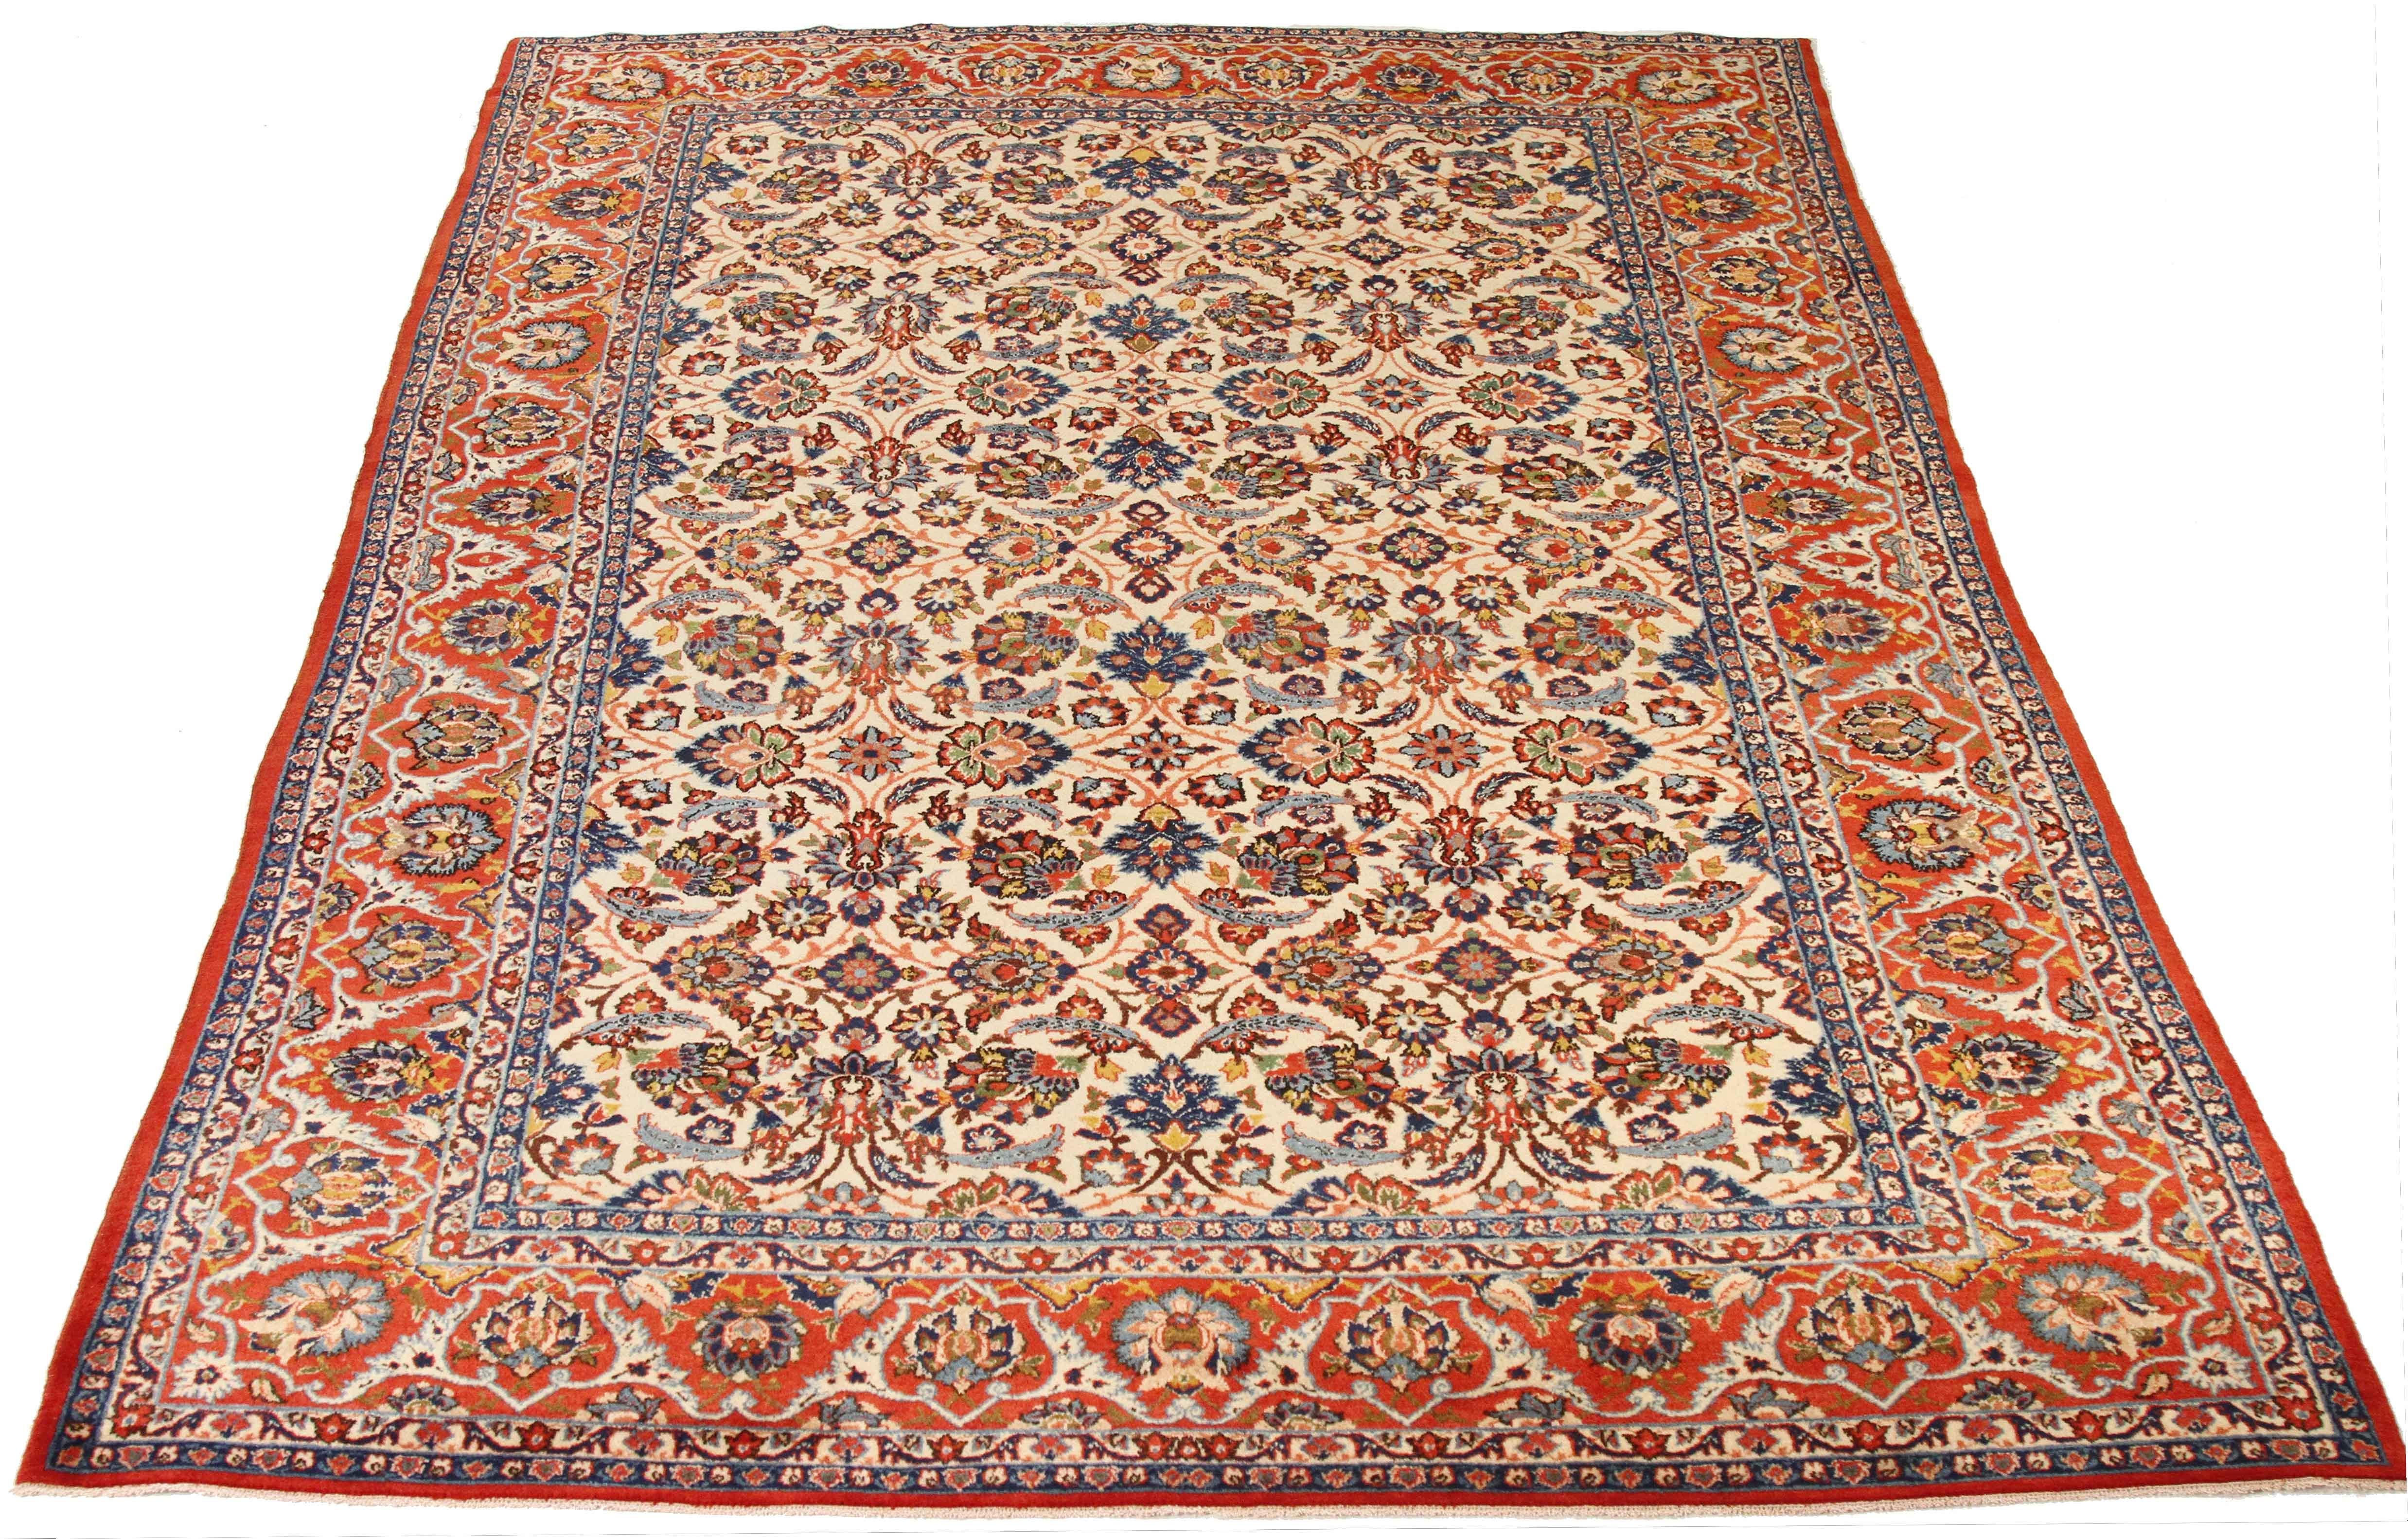 Antique Persian rug handwoven from the finest sheep’s wool and colored with all-natural vegetable dyes that are safe for humans and pets. It’s a traditional Isfahan design featuring colored floral details. It has an ivory center field with a navy